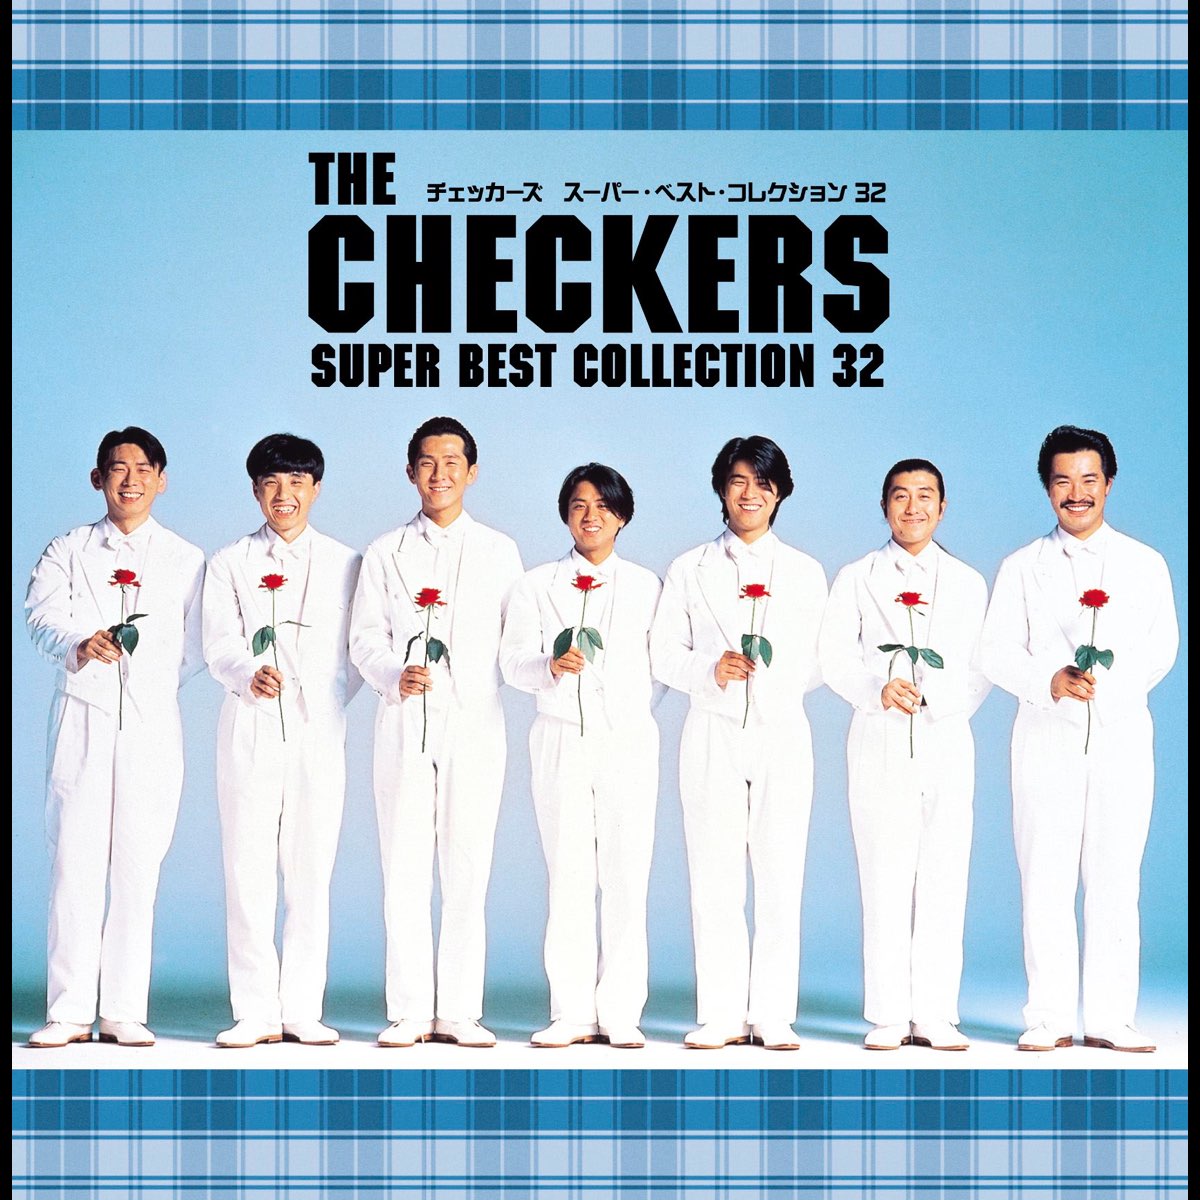 Best collection 2. The Checkers группа. The Checkers группа Фумия. Супер Бест. Best collection.